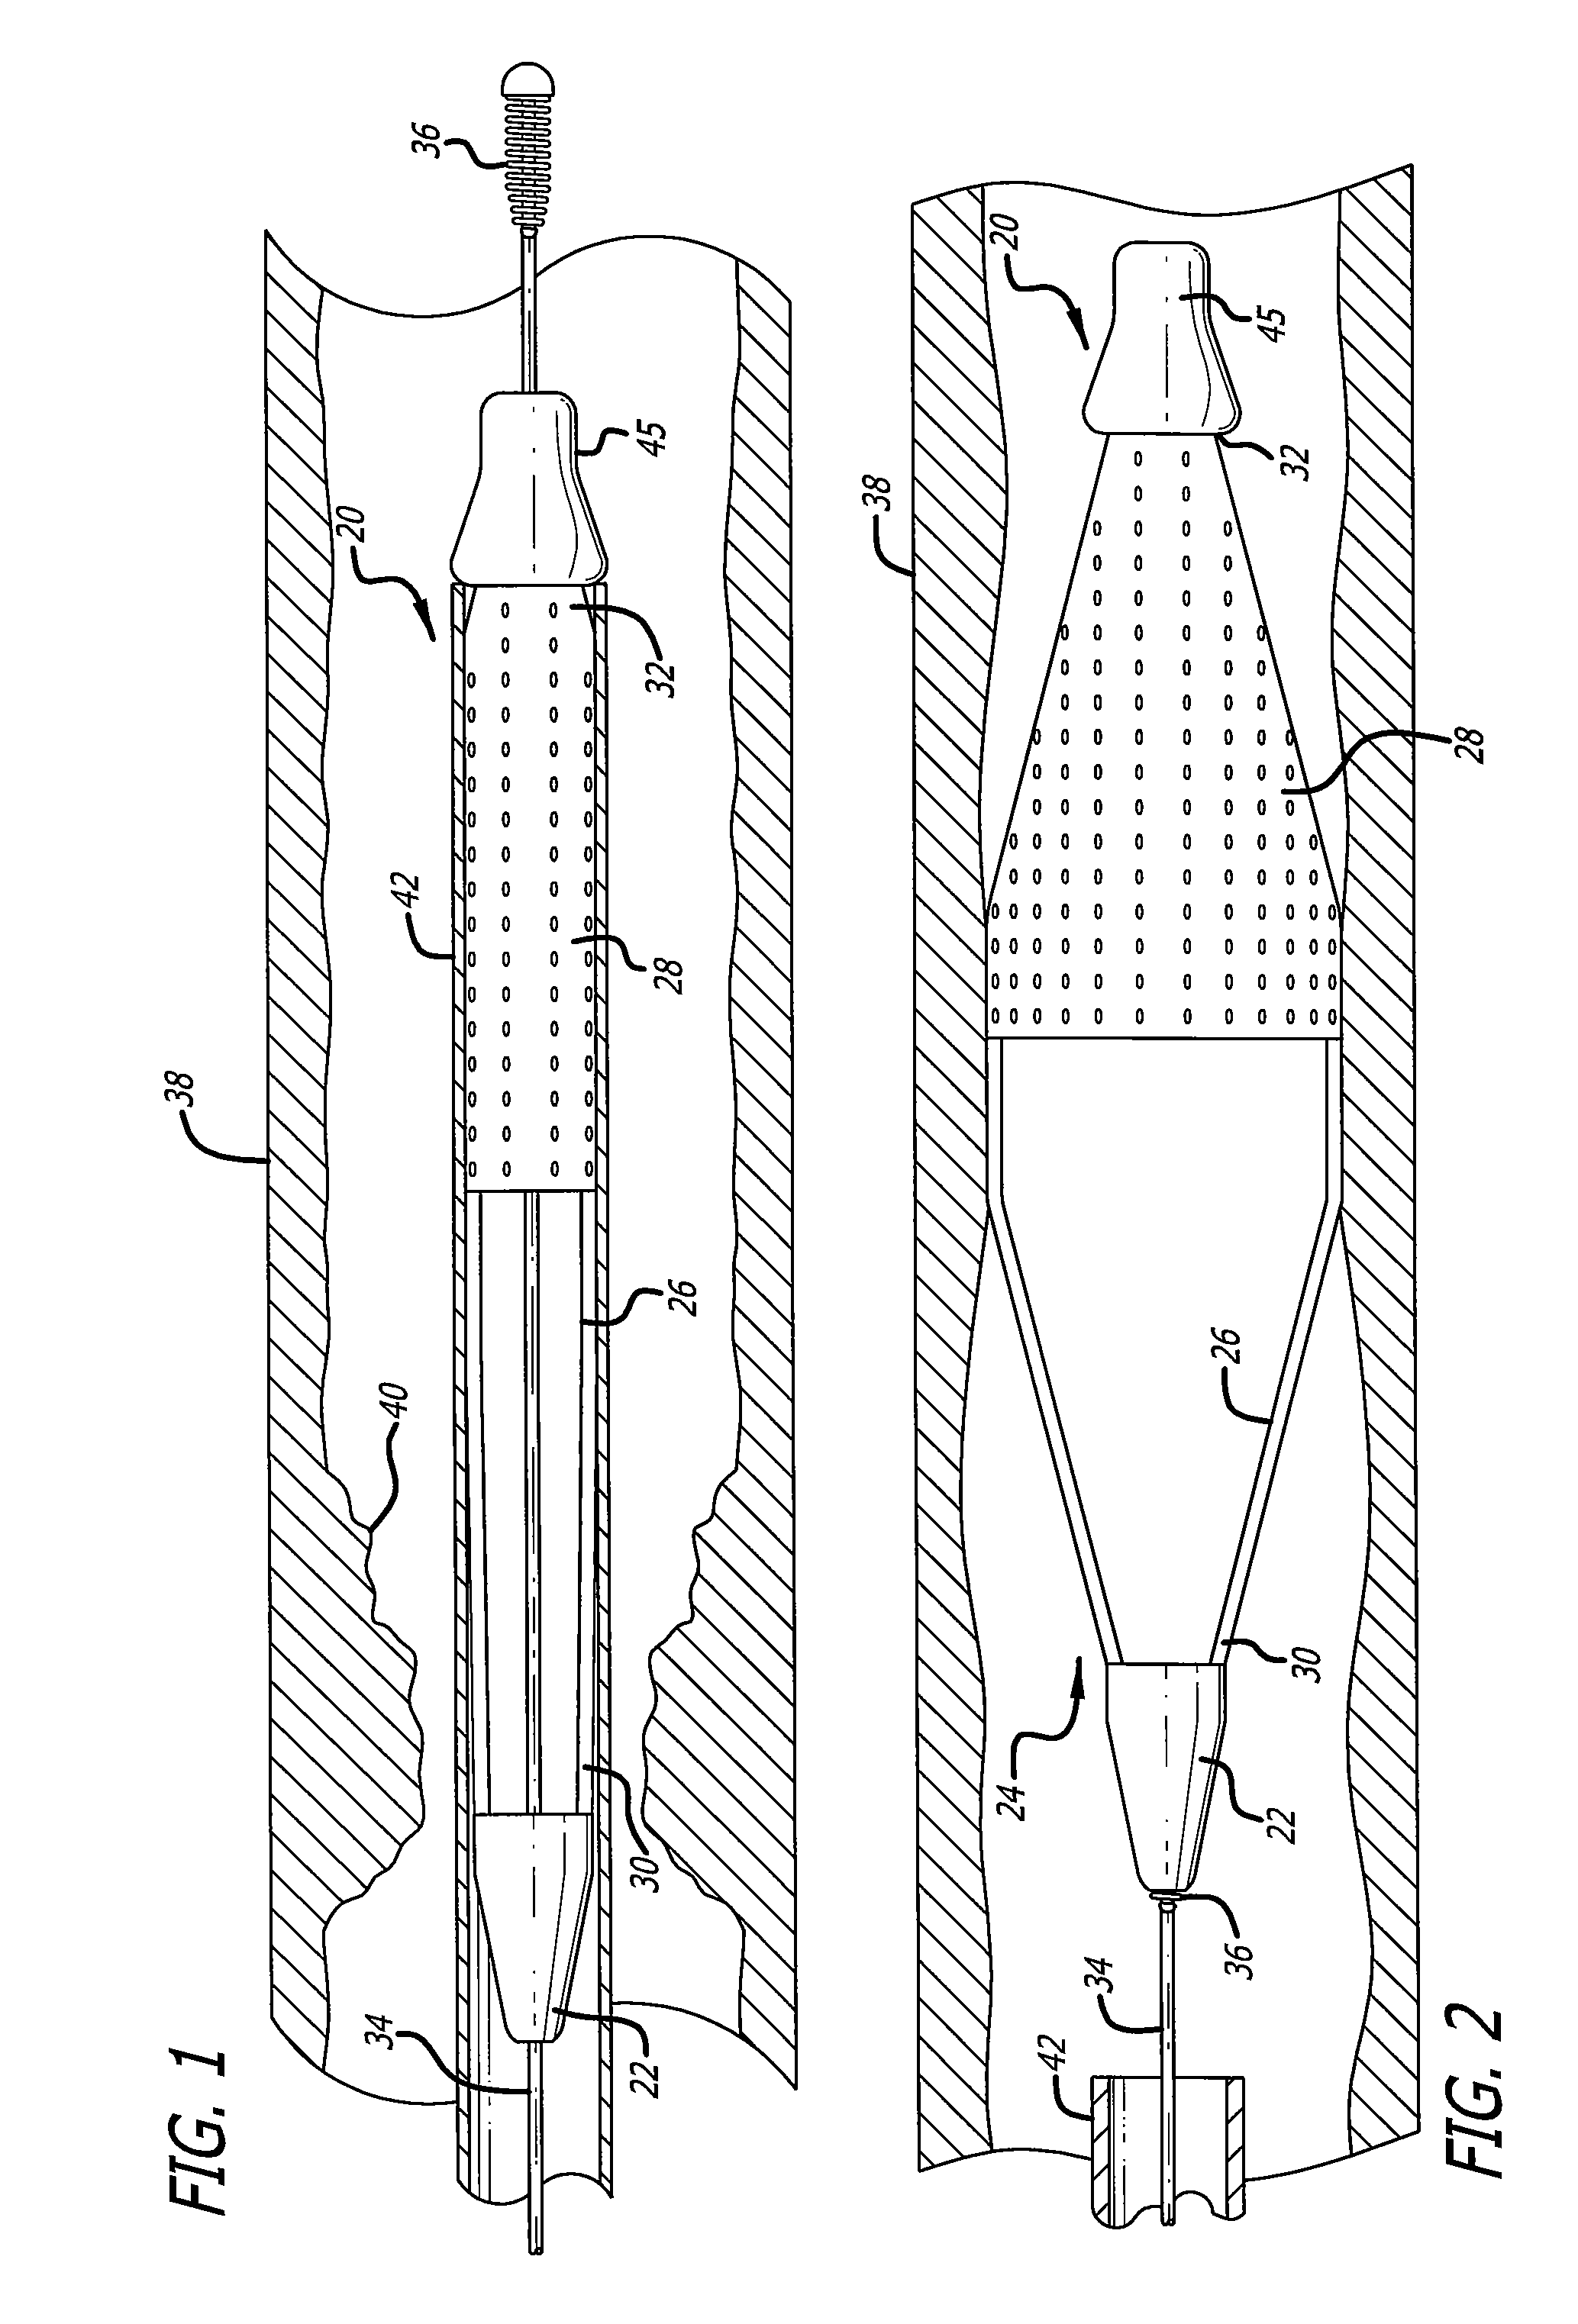 Component for delivering and locking a medical device to a guide wire